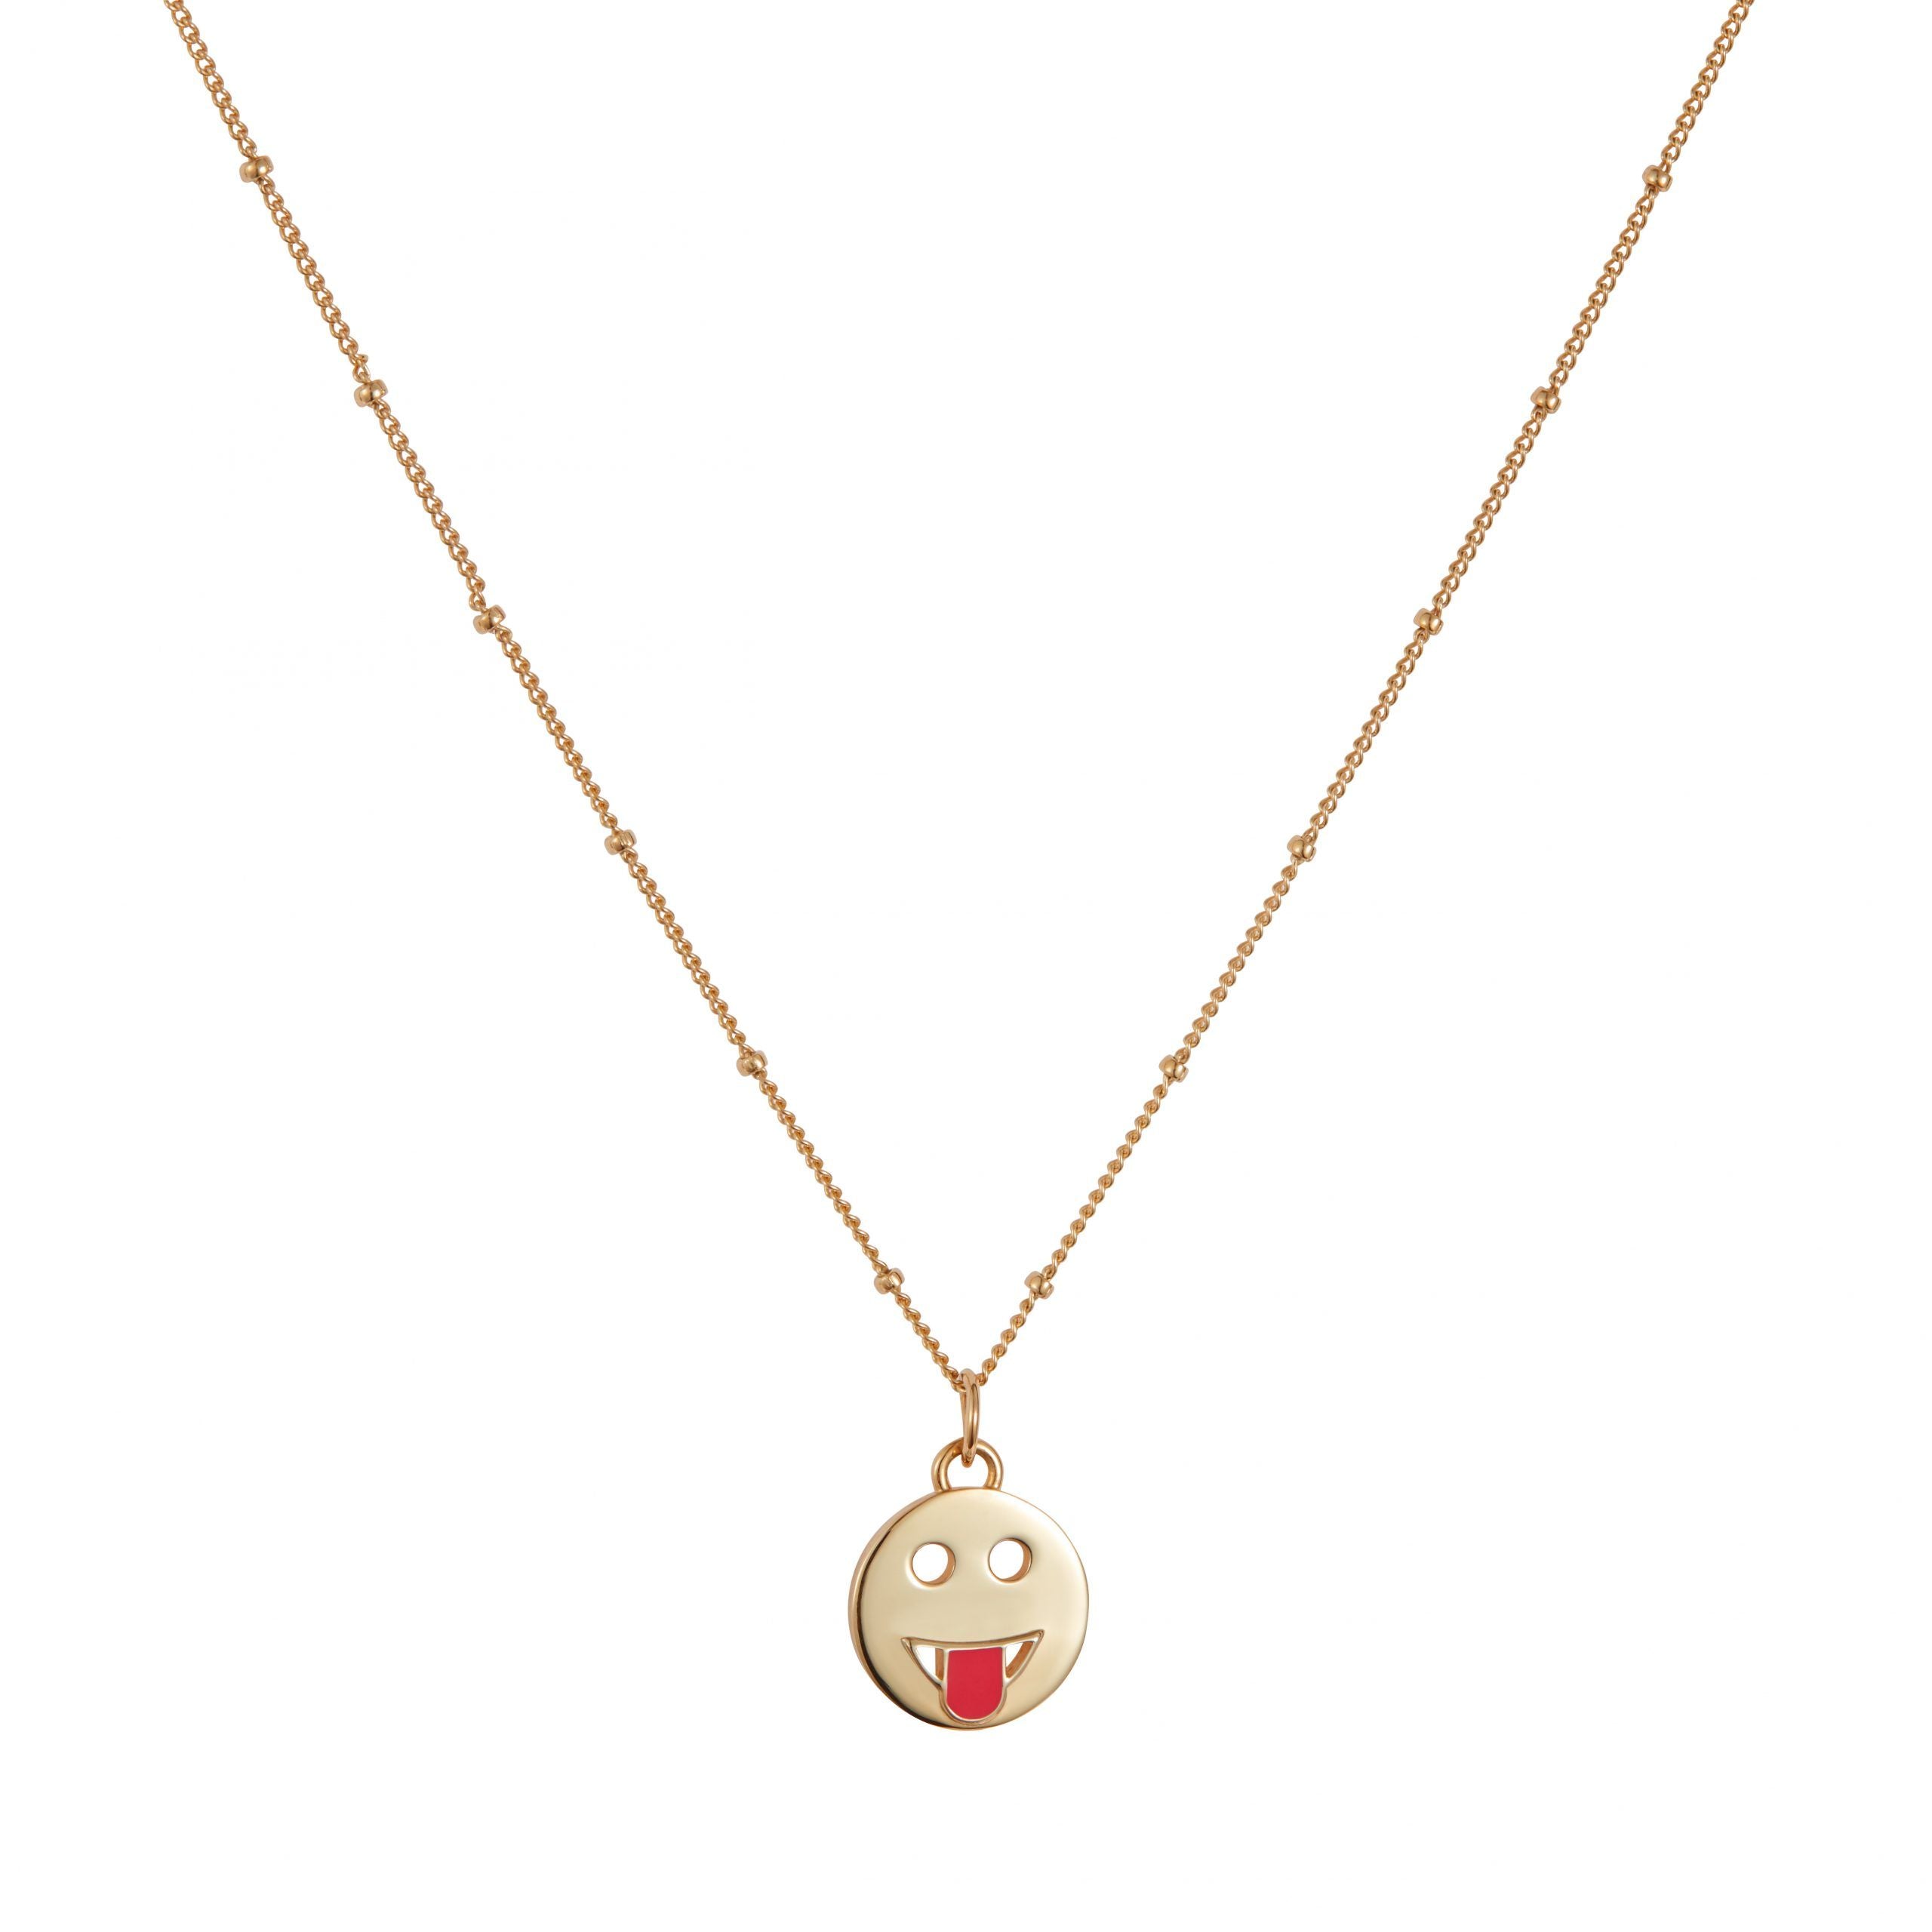 Tongue emoji necklace made of gold vermeil with pink enamel